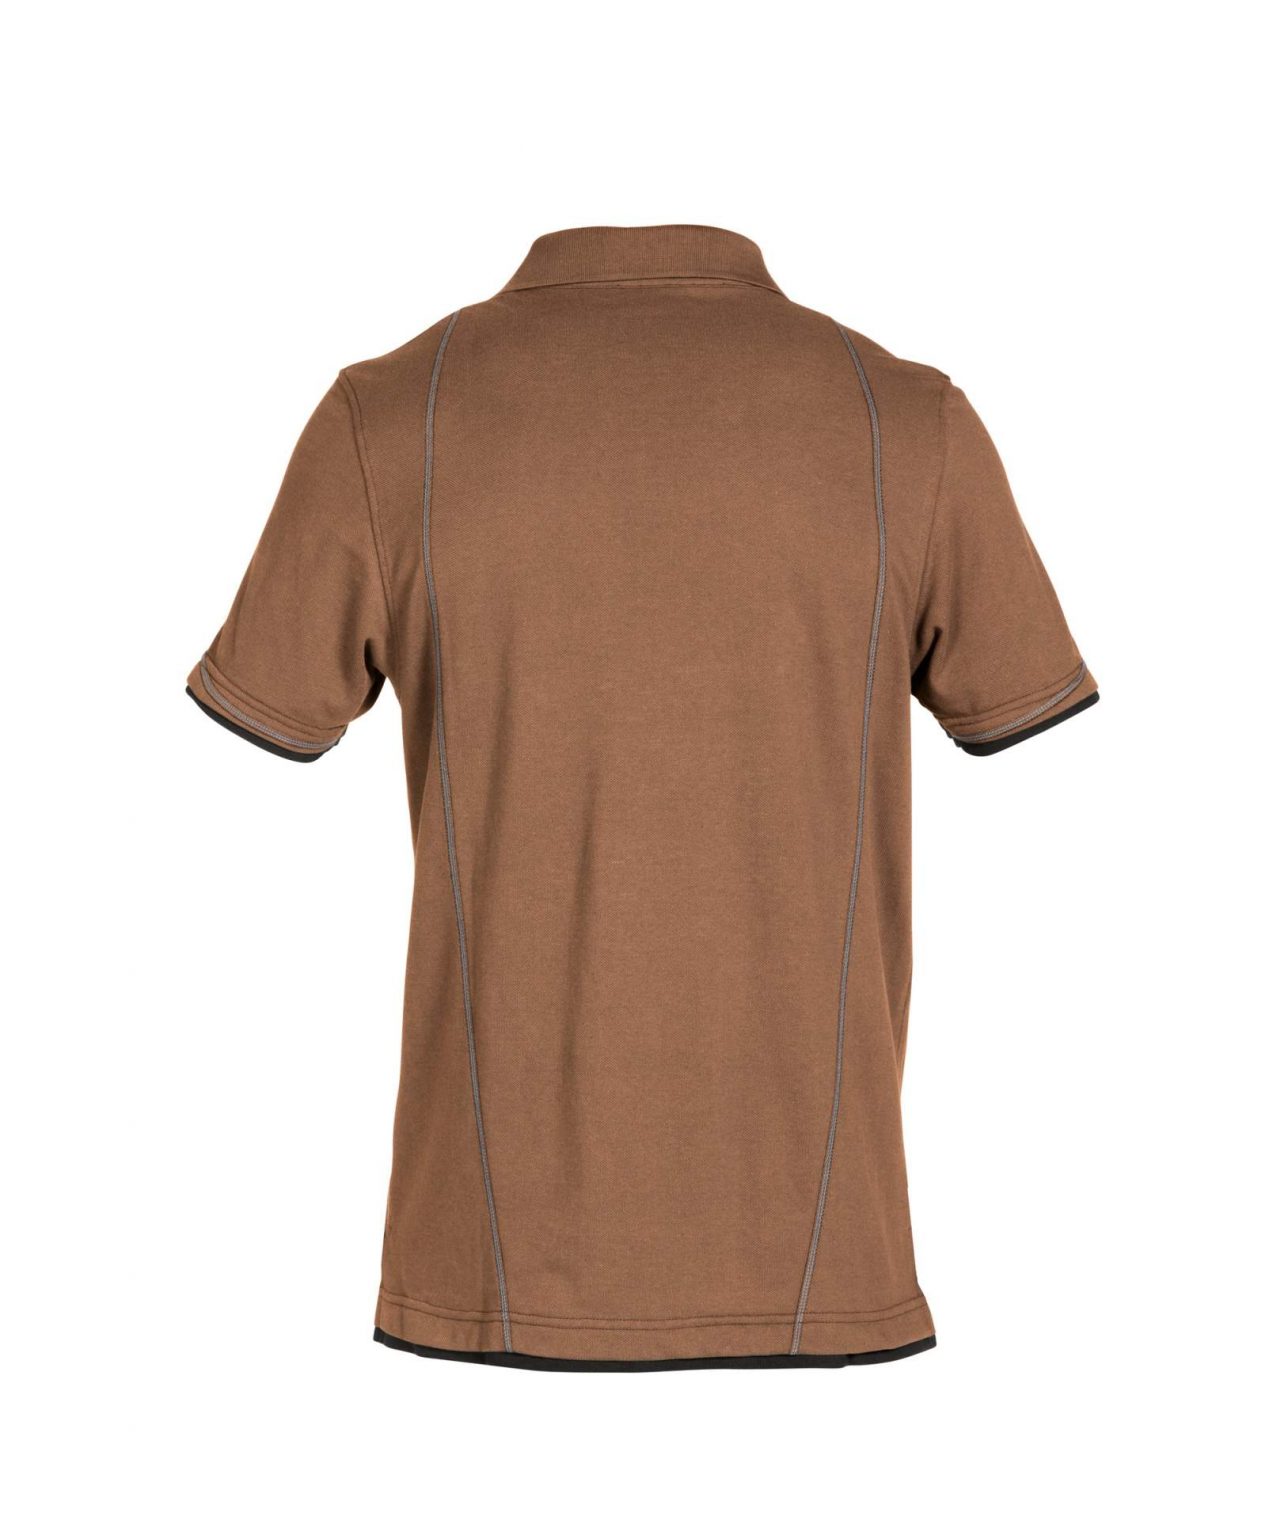 orbital polo shirt clay brown anthracite grey back